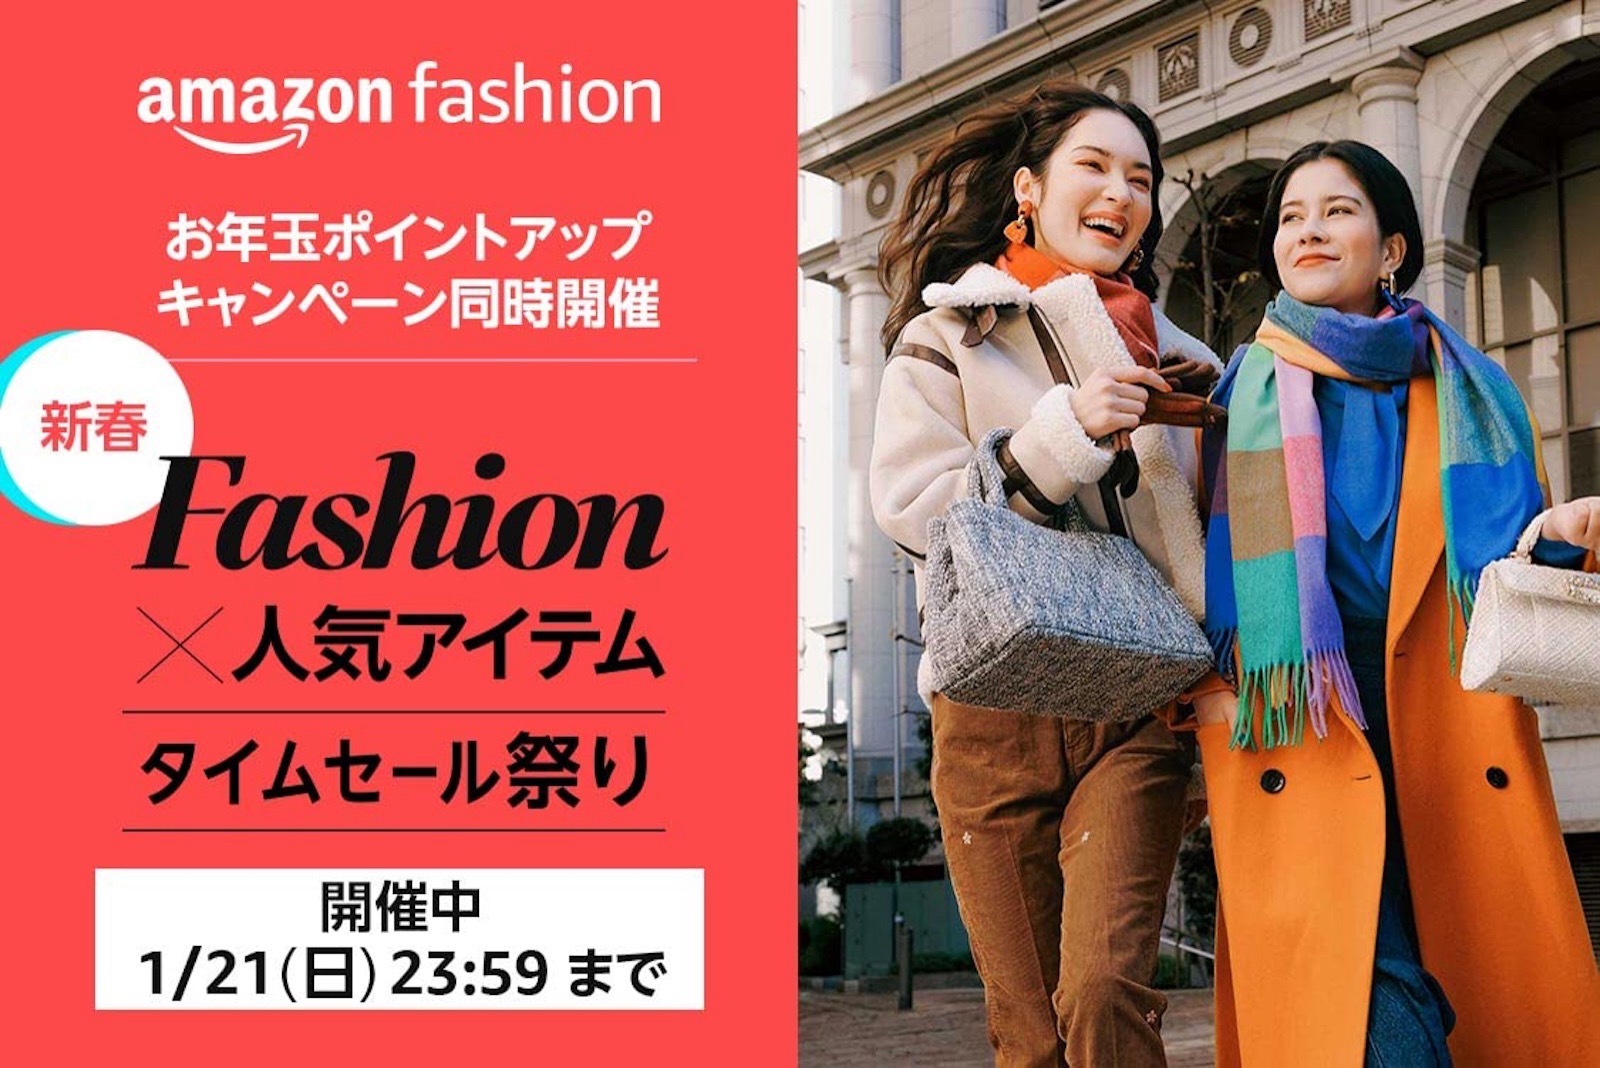 Fashion Timesale Festival ongoing